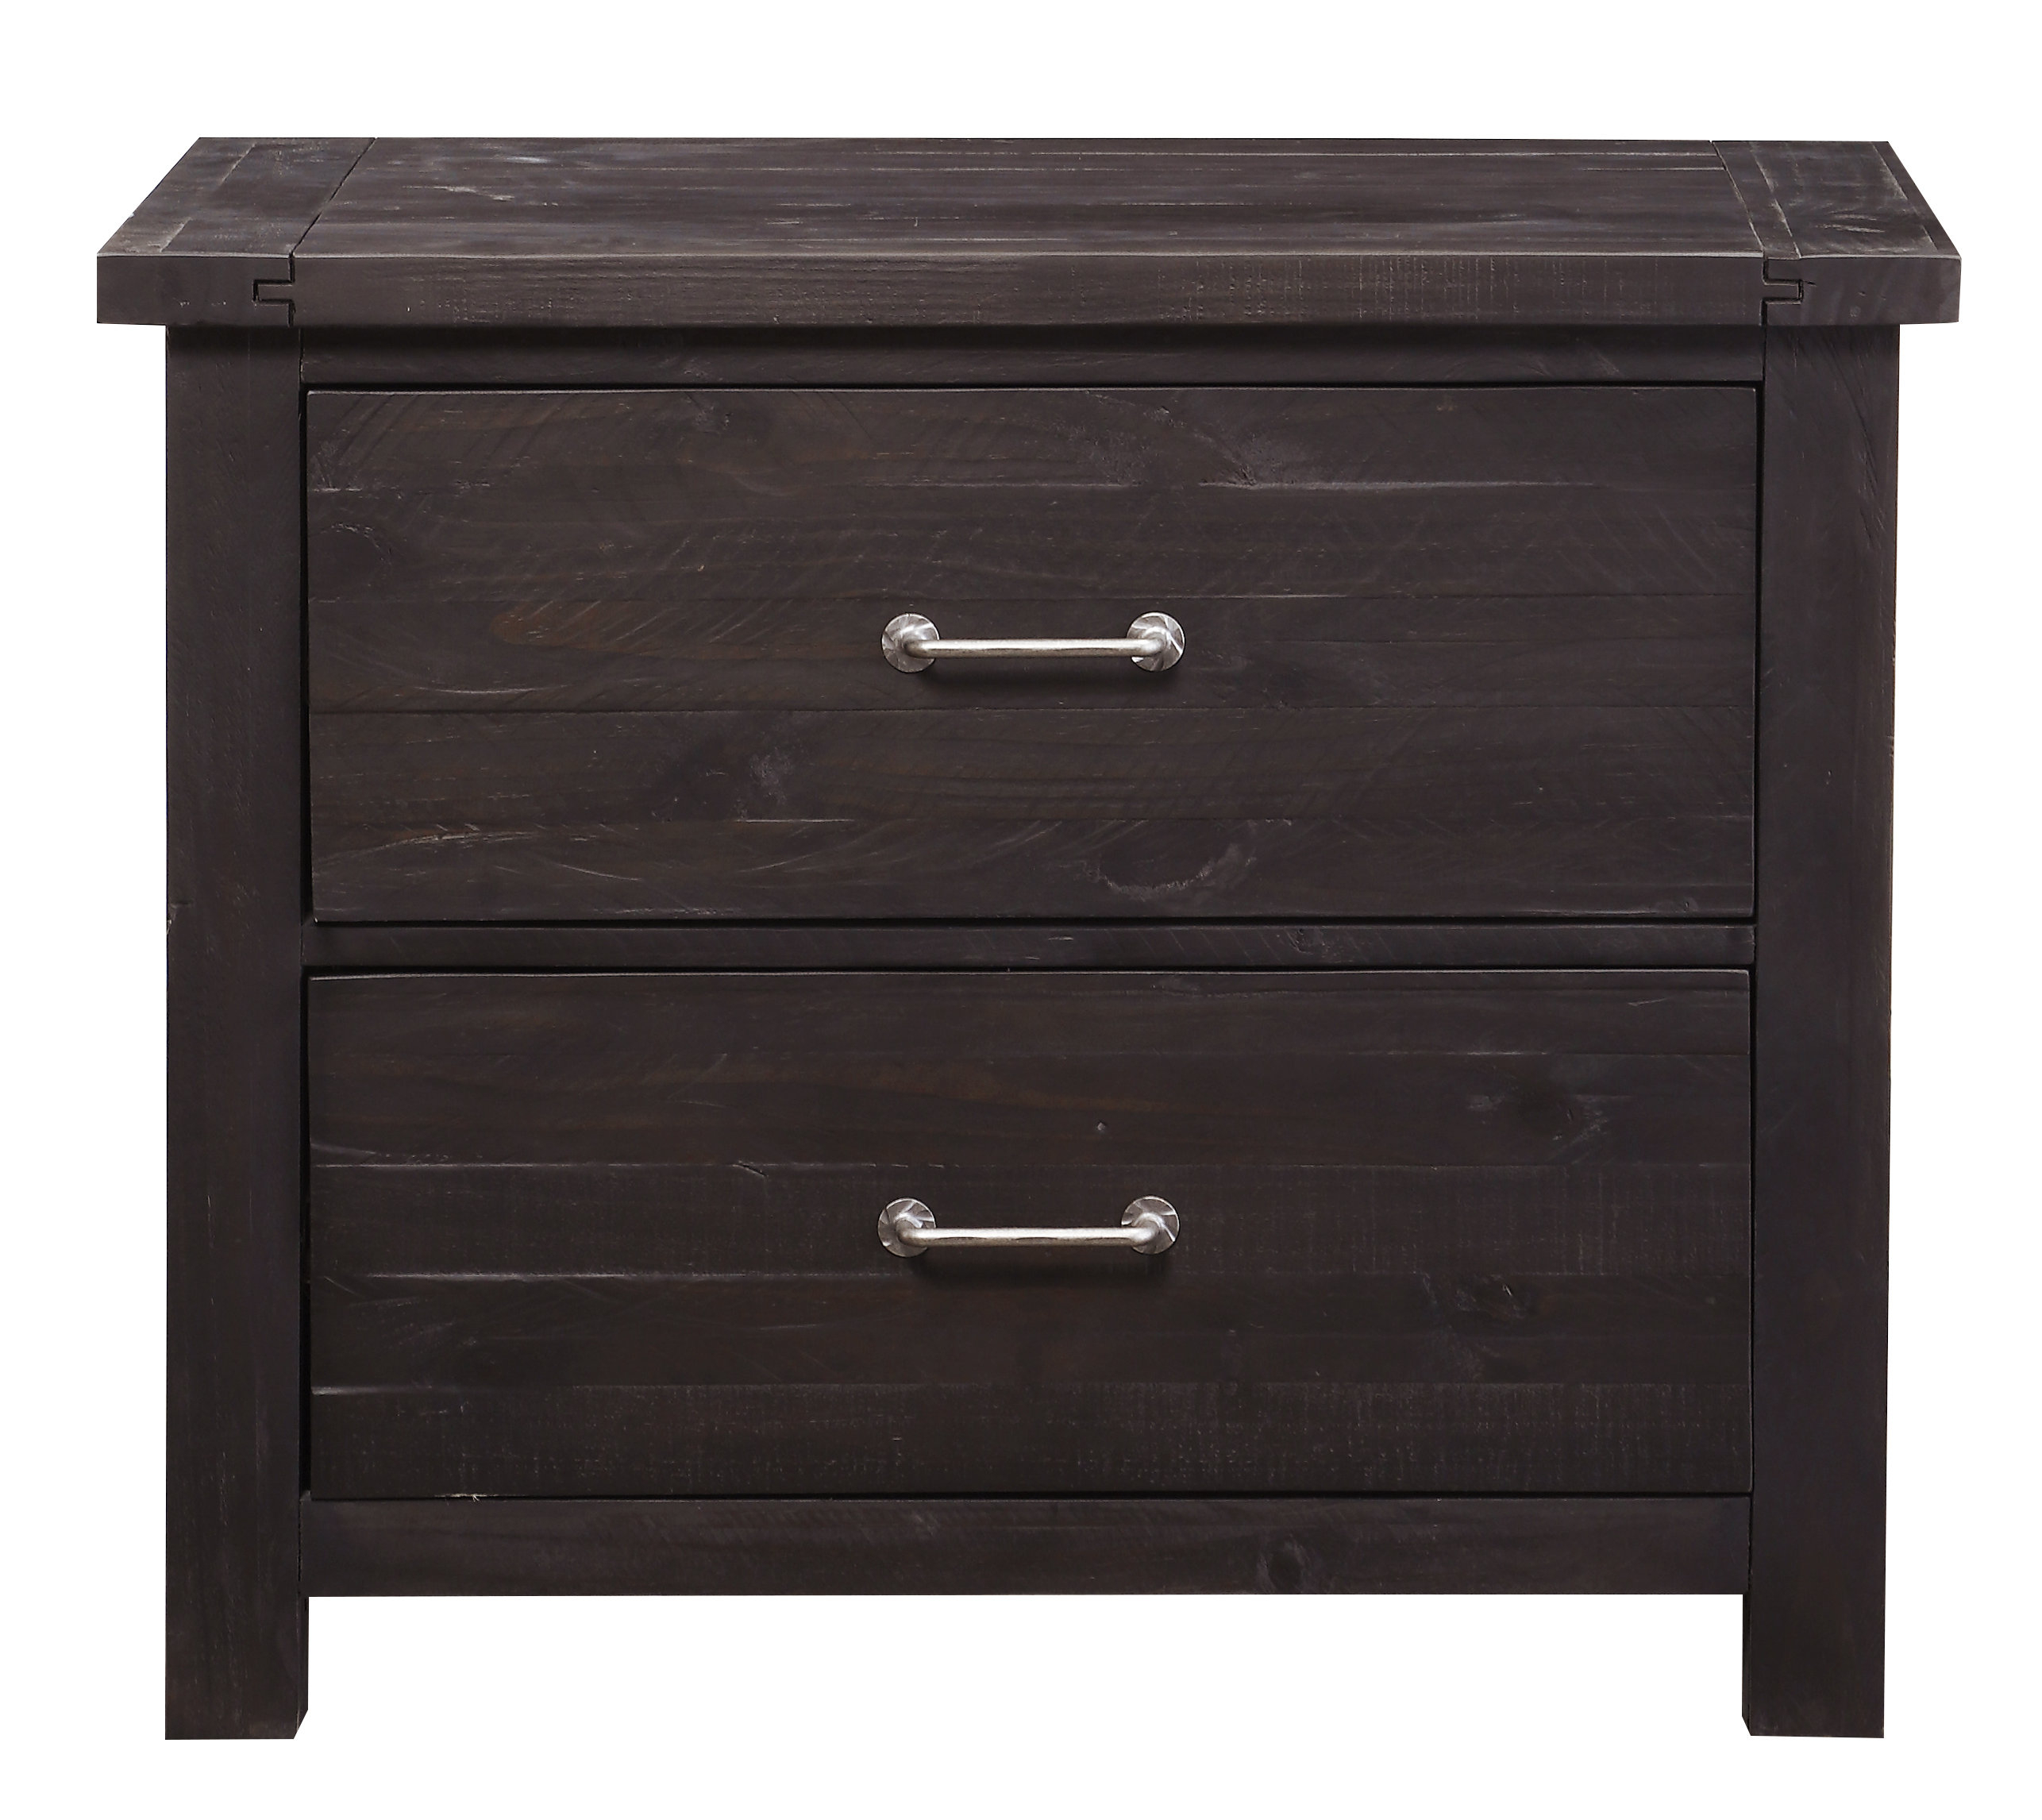 2 Drawer Lateral Wood File Cabinet • Cabinet Ideas